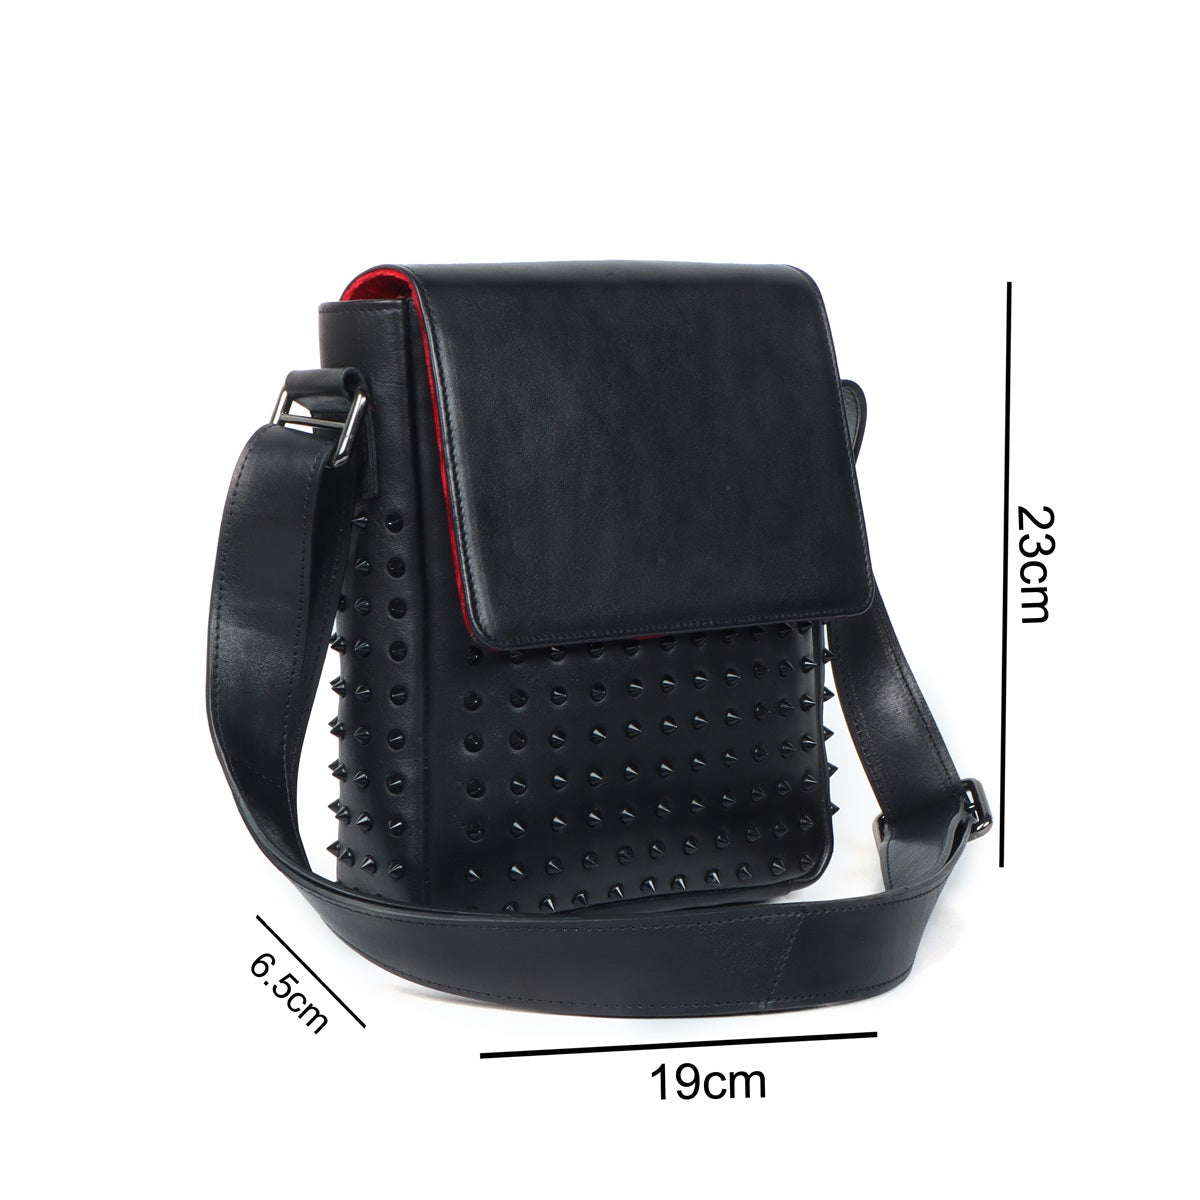 Crossbody Flap Over with Black Studded Leather Bag